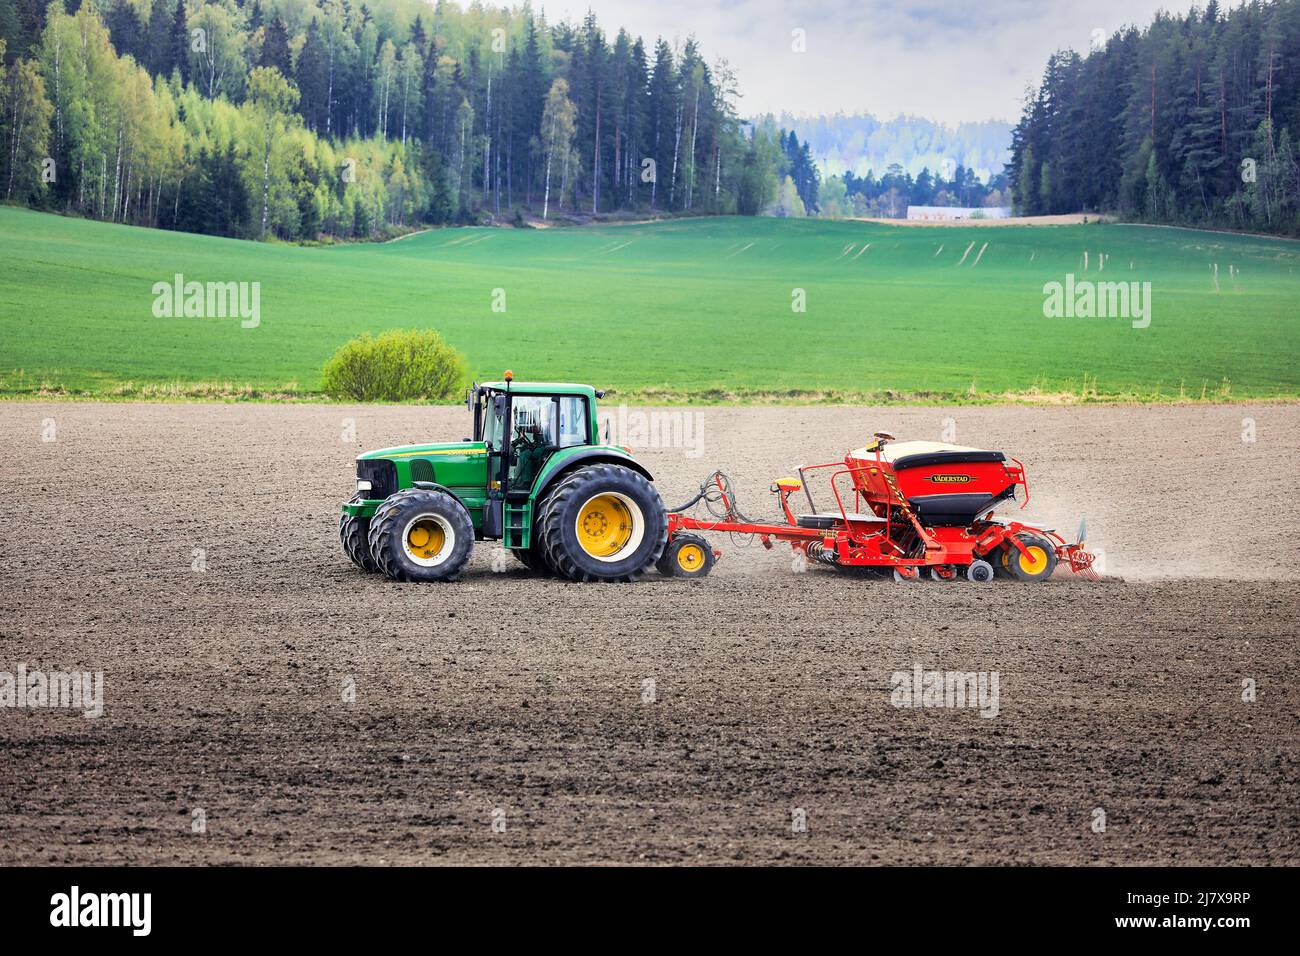 Farmer working with John Deere 6820 tractor and Väderstad Biodrill seed drill in field on a day of spring. Salo, Finland. May 15, 2021. Stock Photo